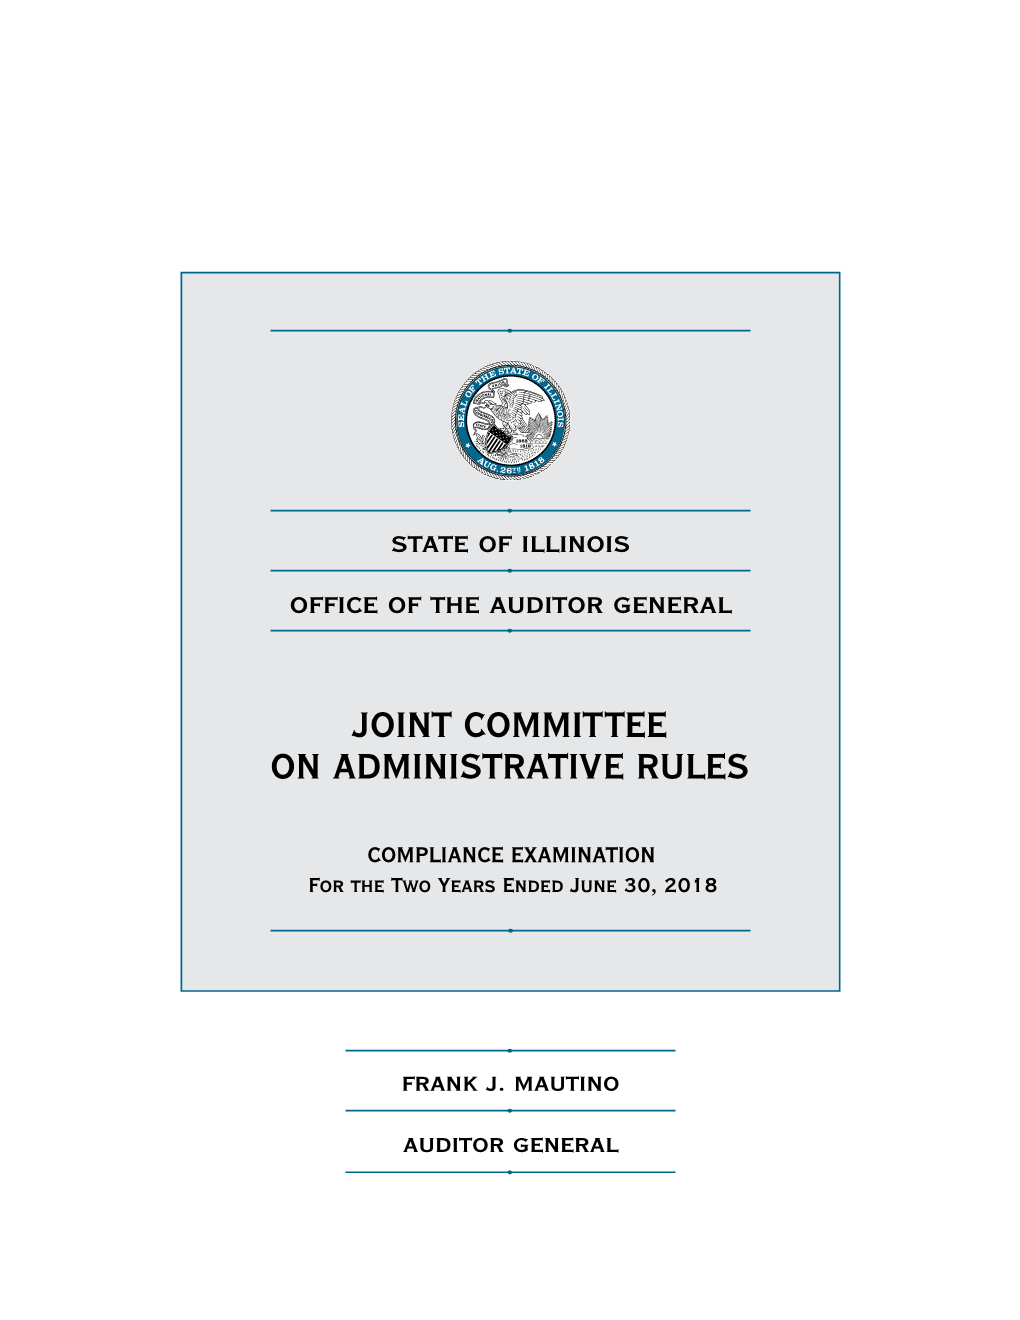 Joint Committee on Administrative Rules